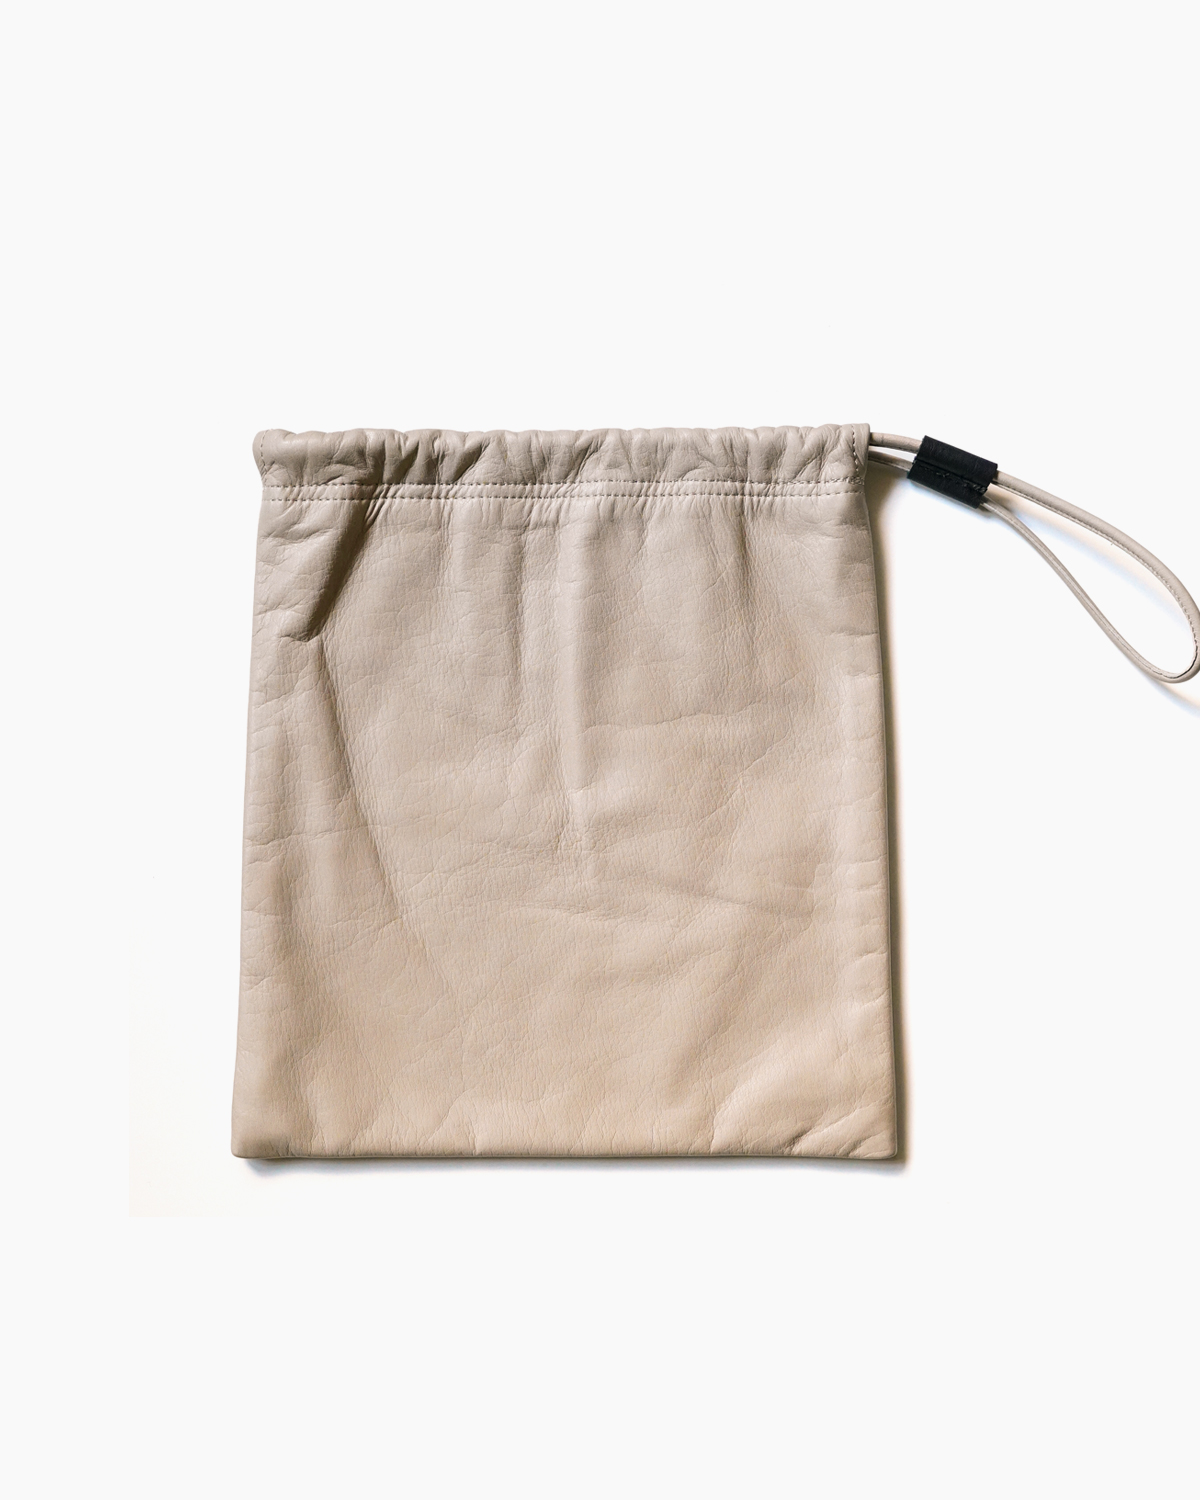 COMESANDGOES｜COW LEATHER DRAWSTRING BAG＜SMALL＞ - GrayBeige 